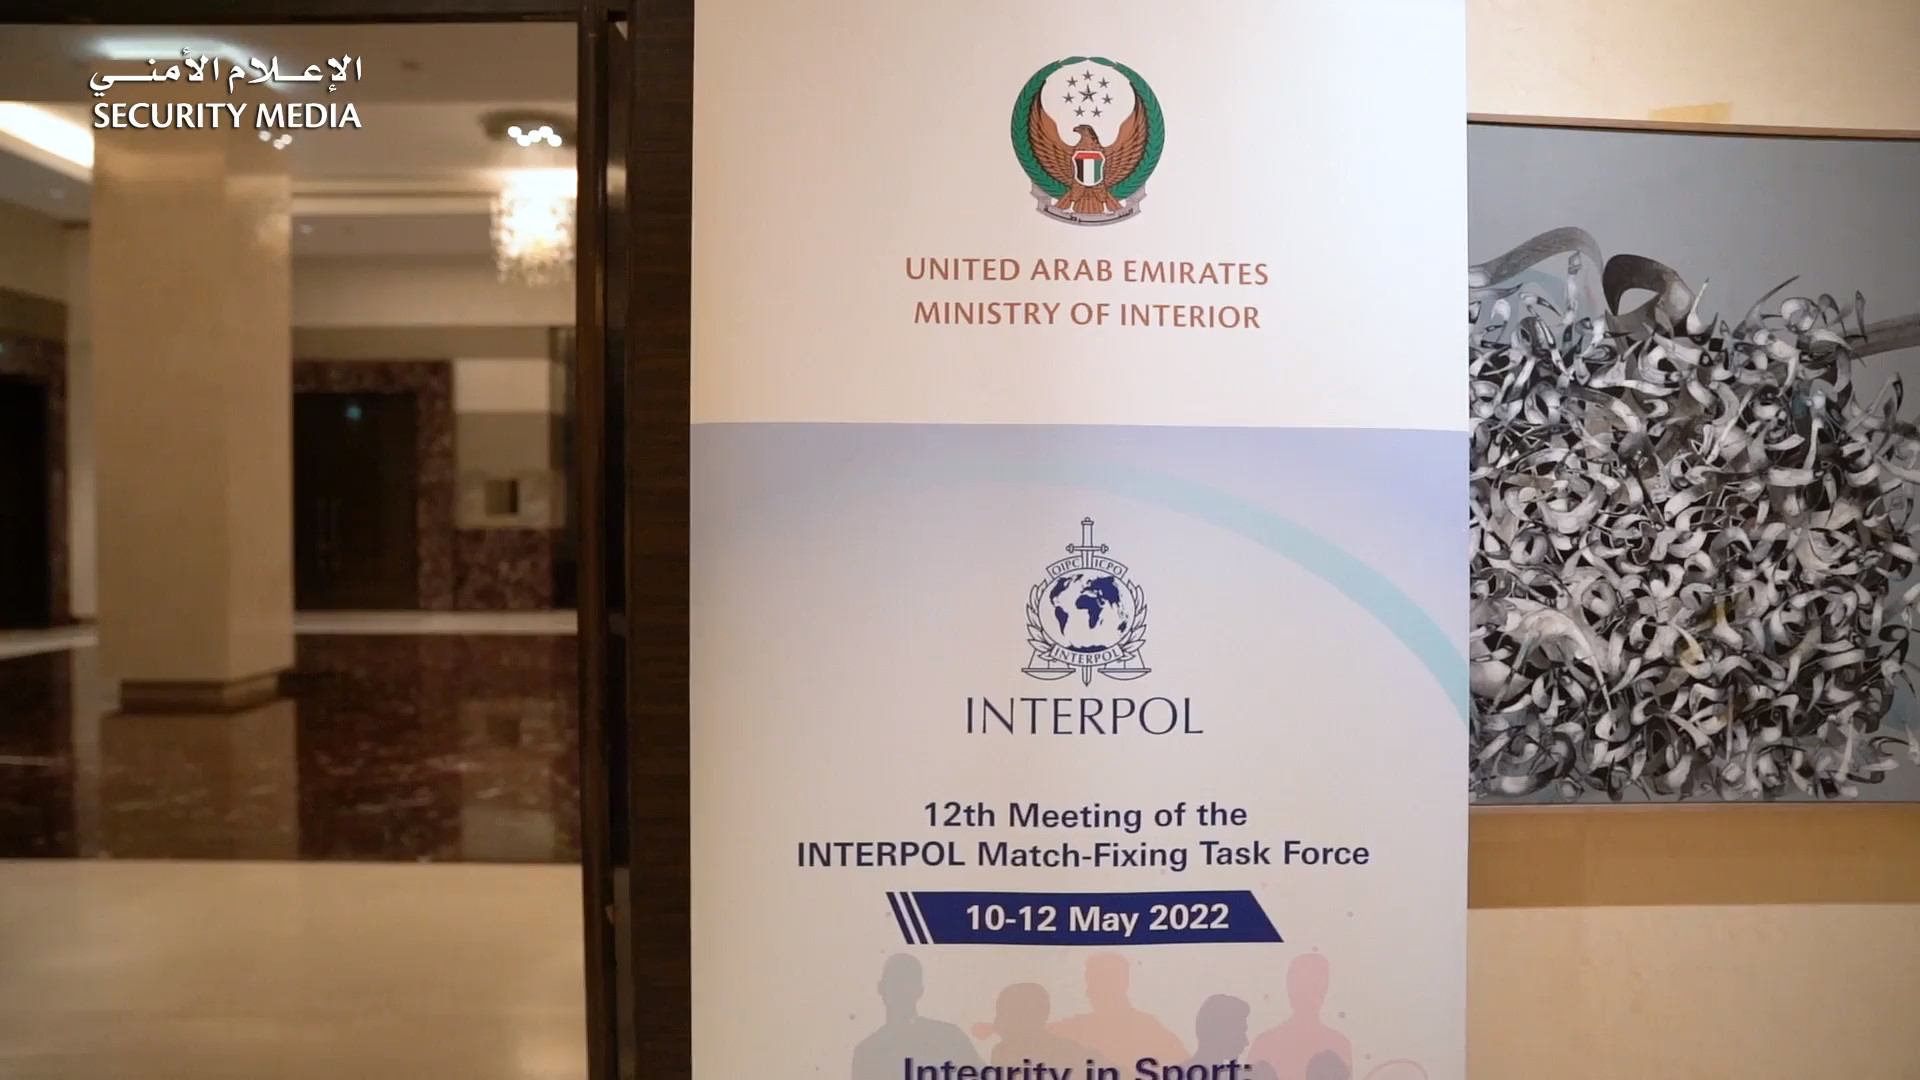 The UAE hosts the 12th meeting of the INTERPOL Match Fixing Task Force